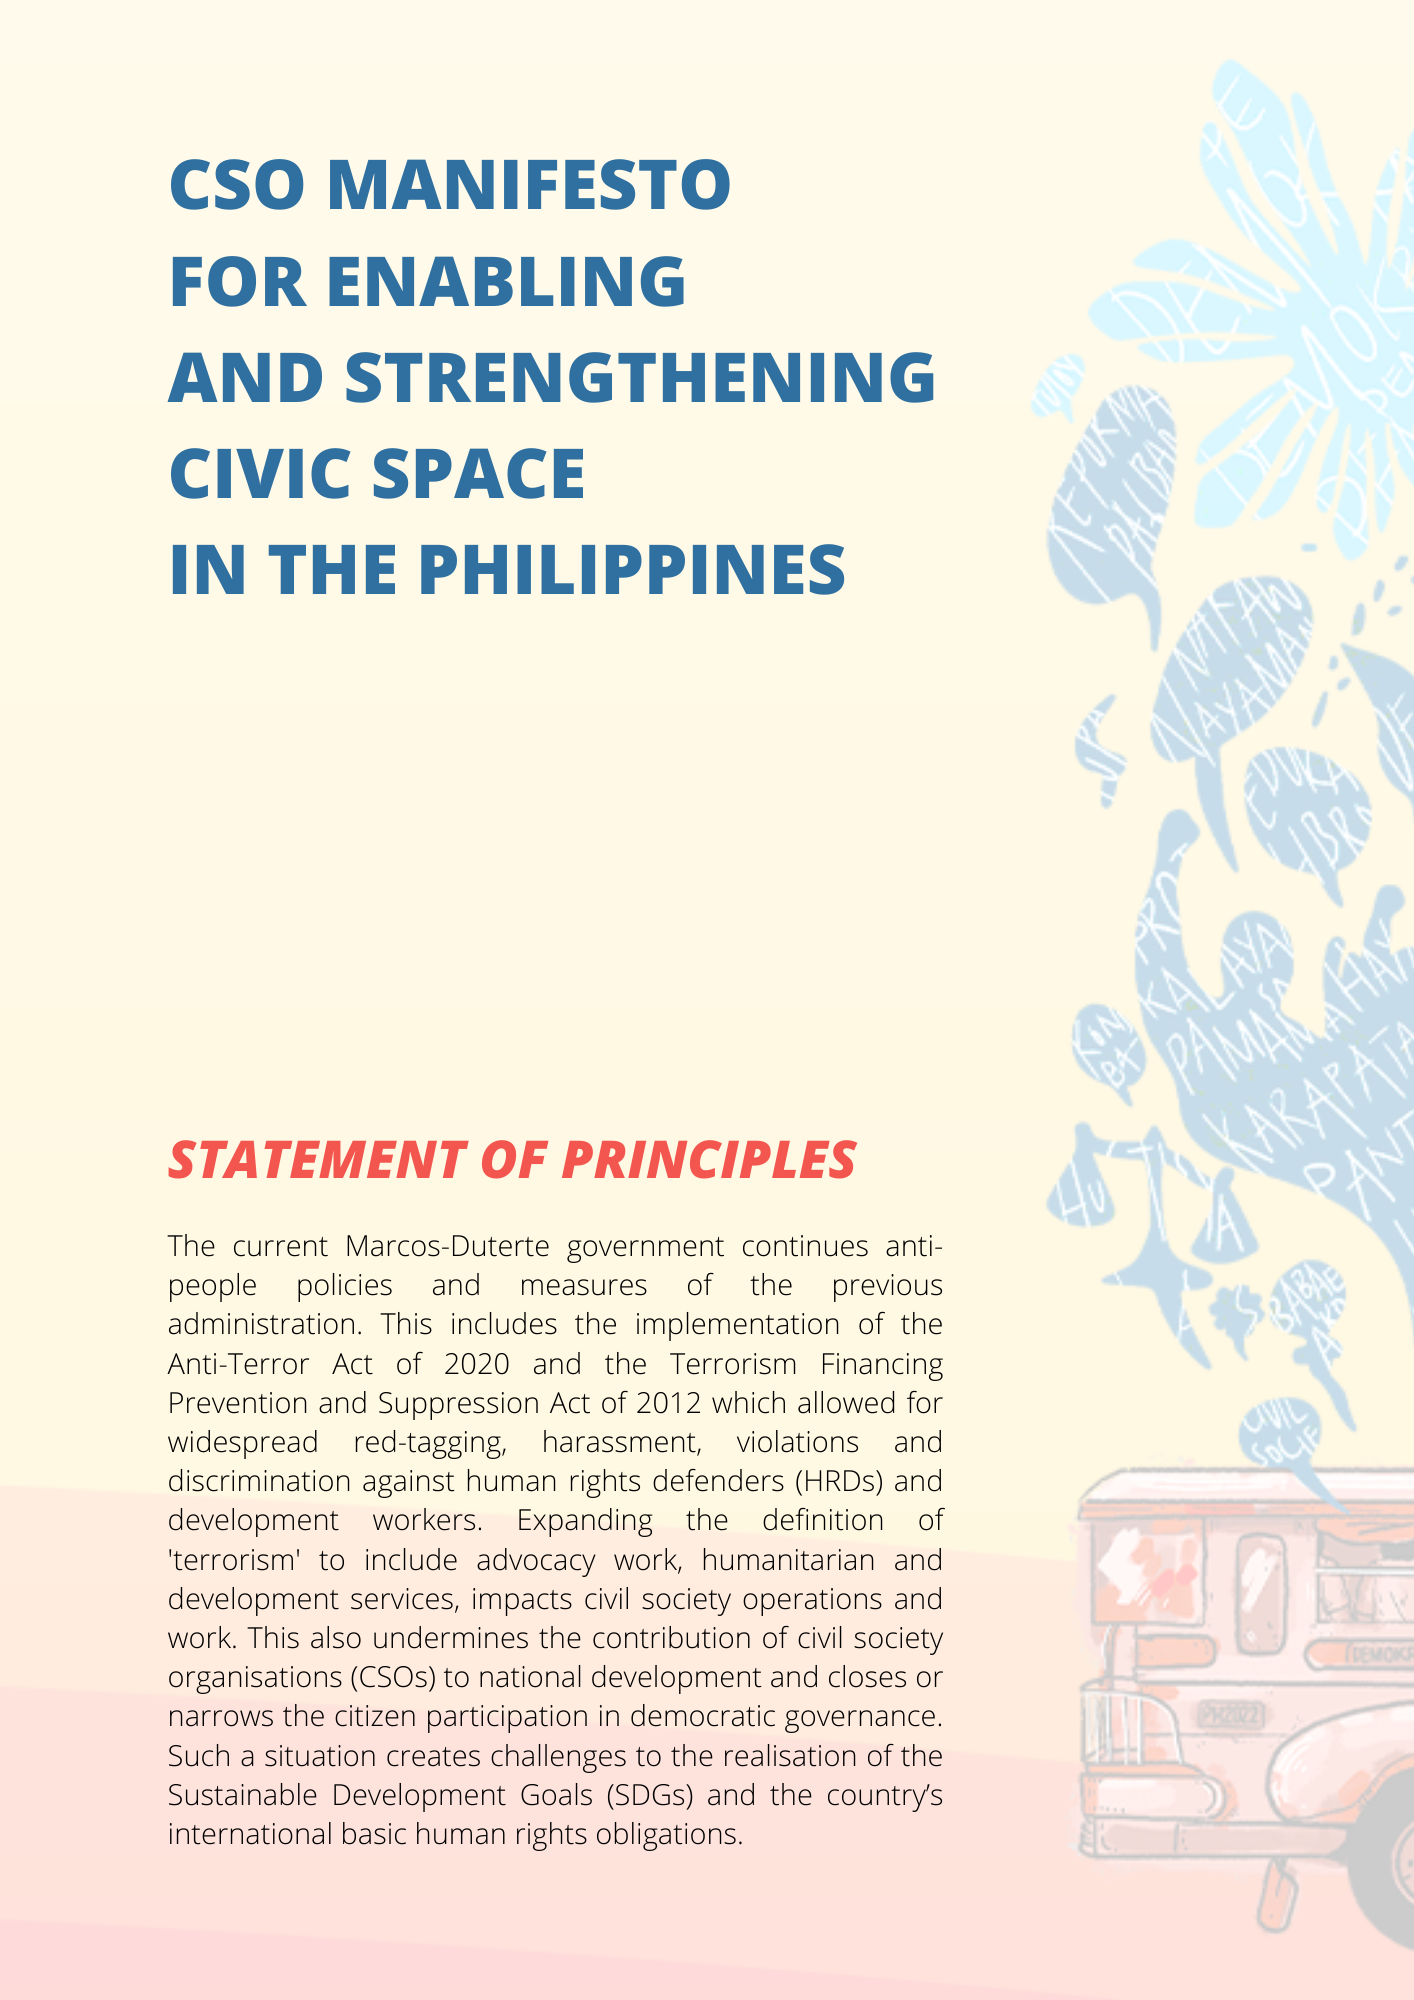 CSO Manifesto for Enabling and Strengthening Civic Space in the Philippines